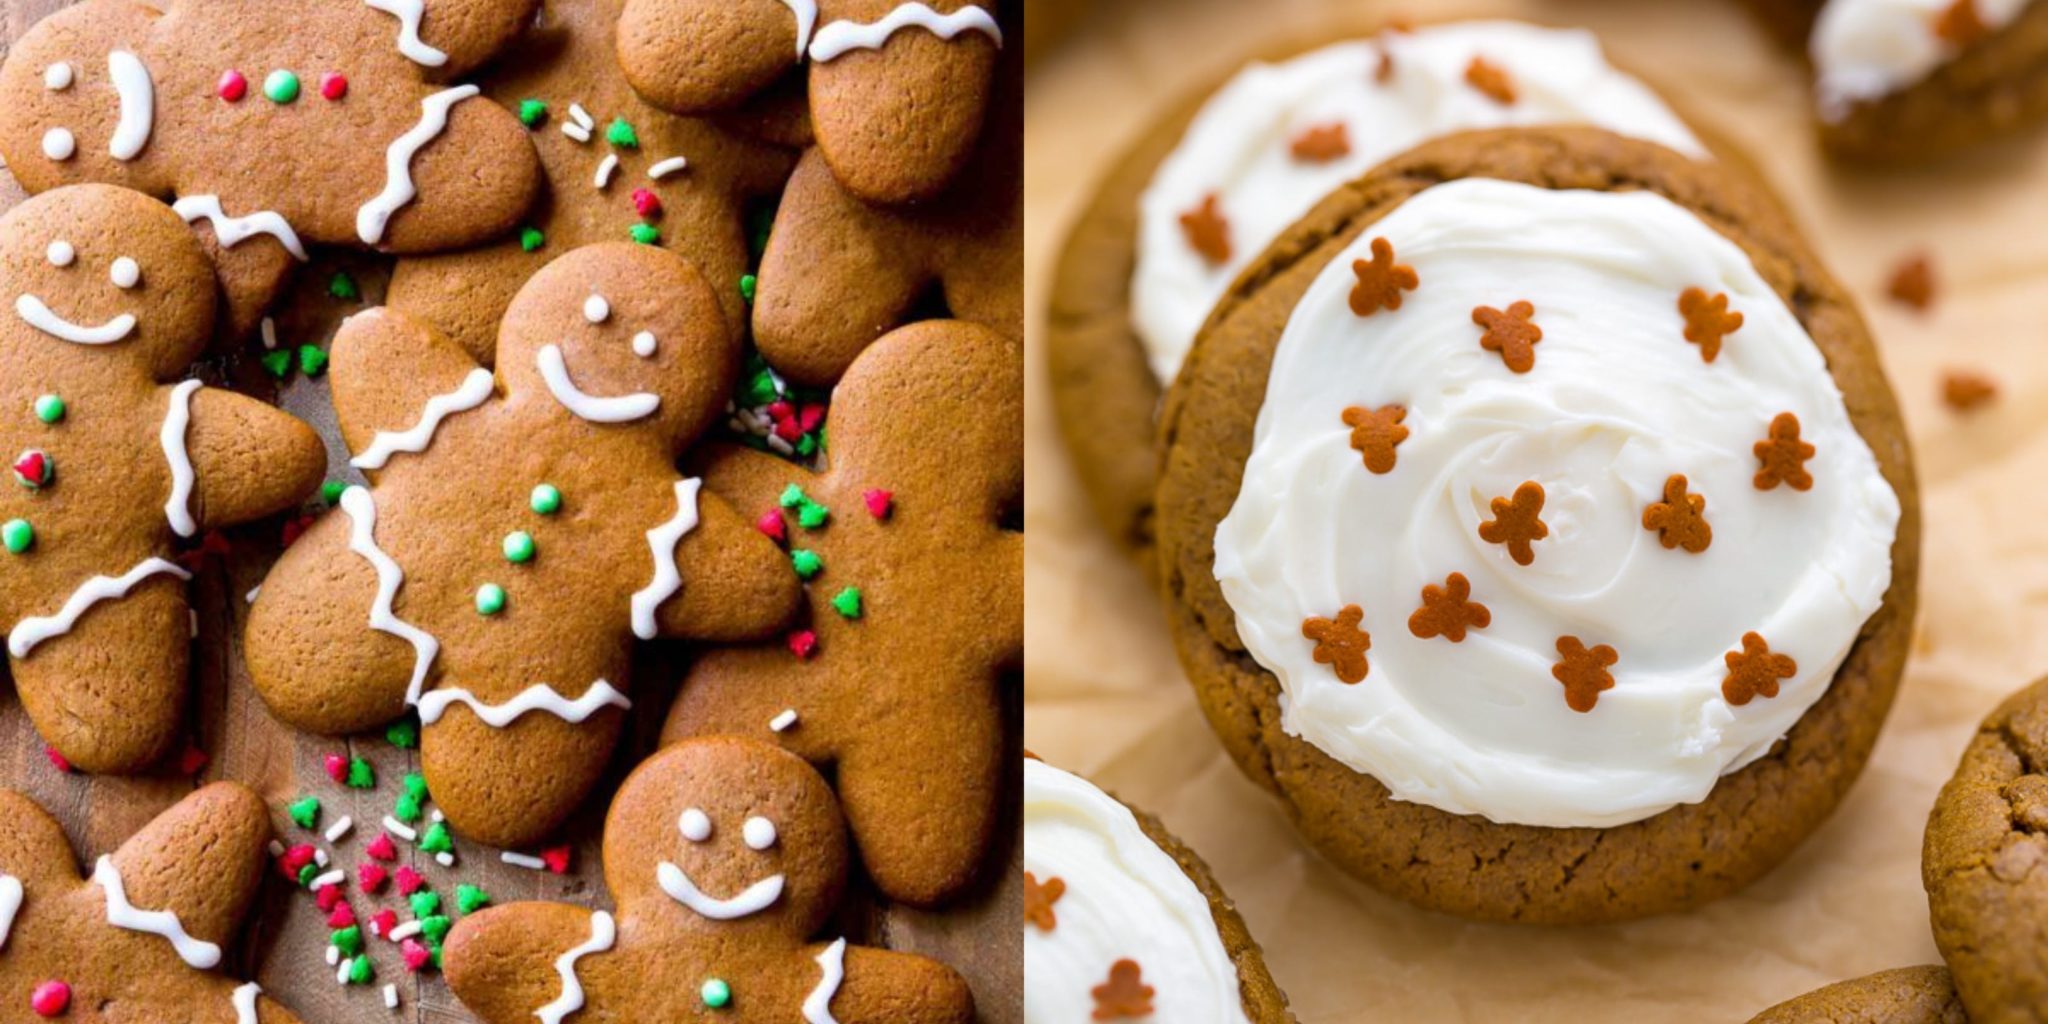 The variations of gingerbread